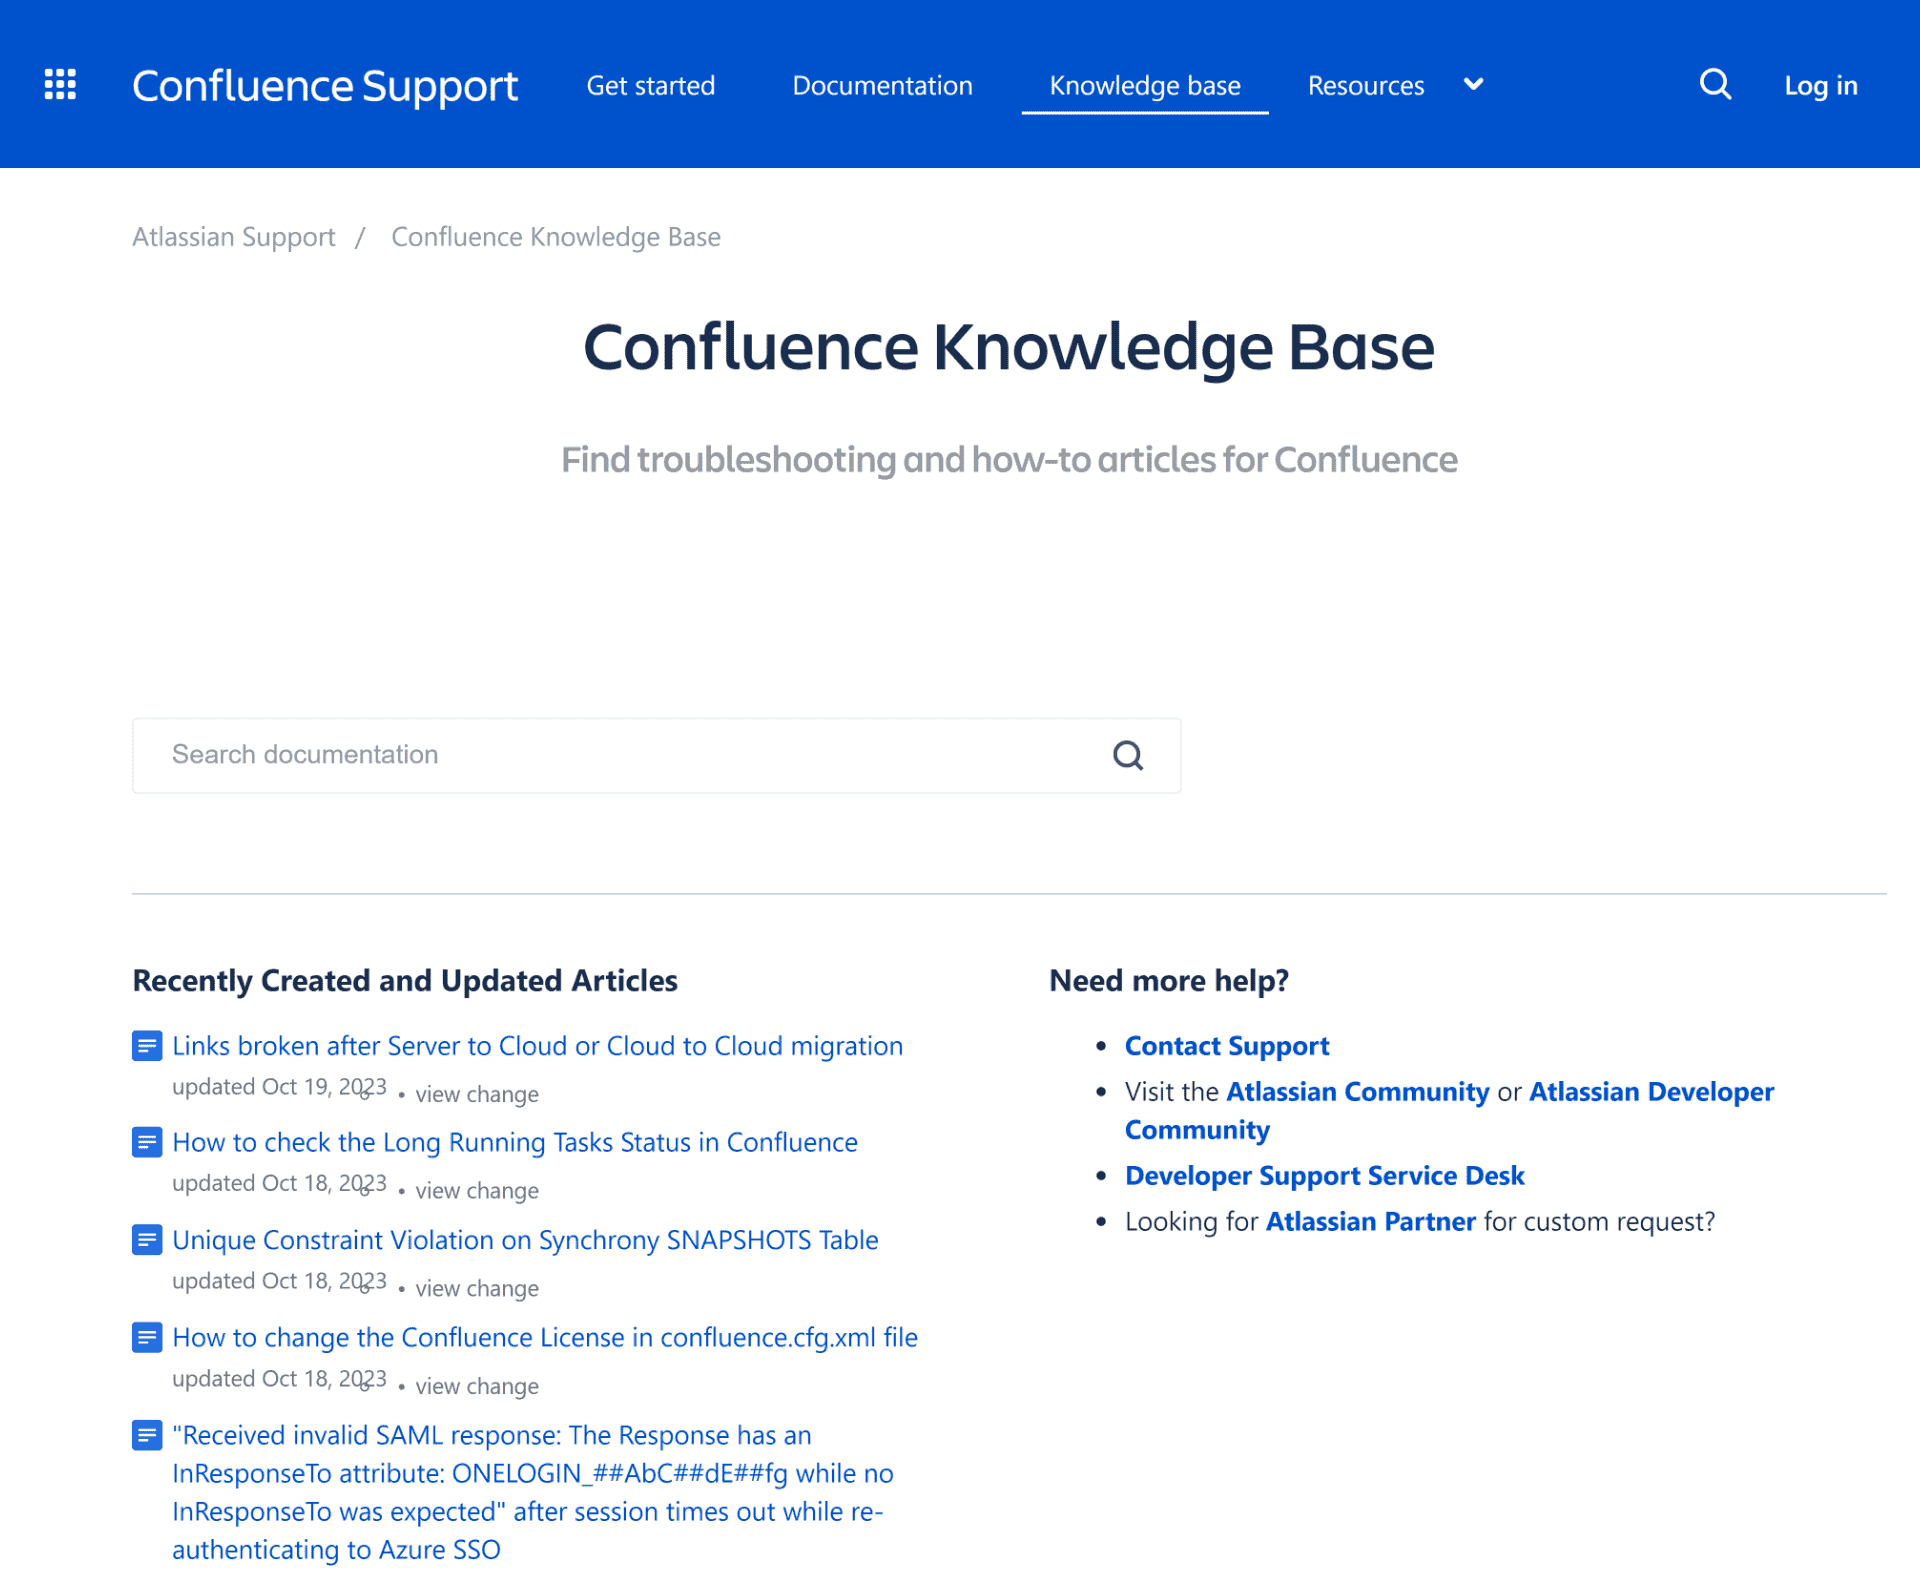 Make Your Knowledge Base Articles Easy to Search & Skim